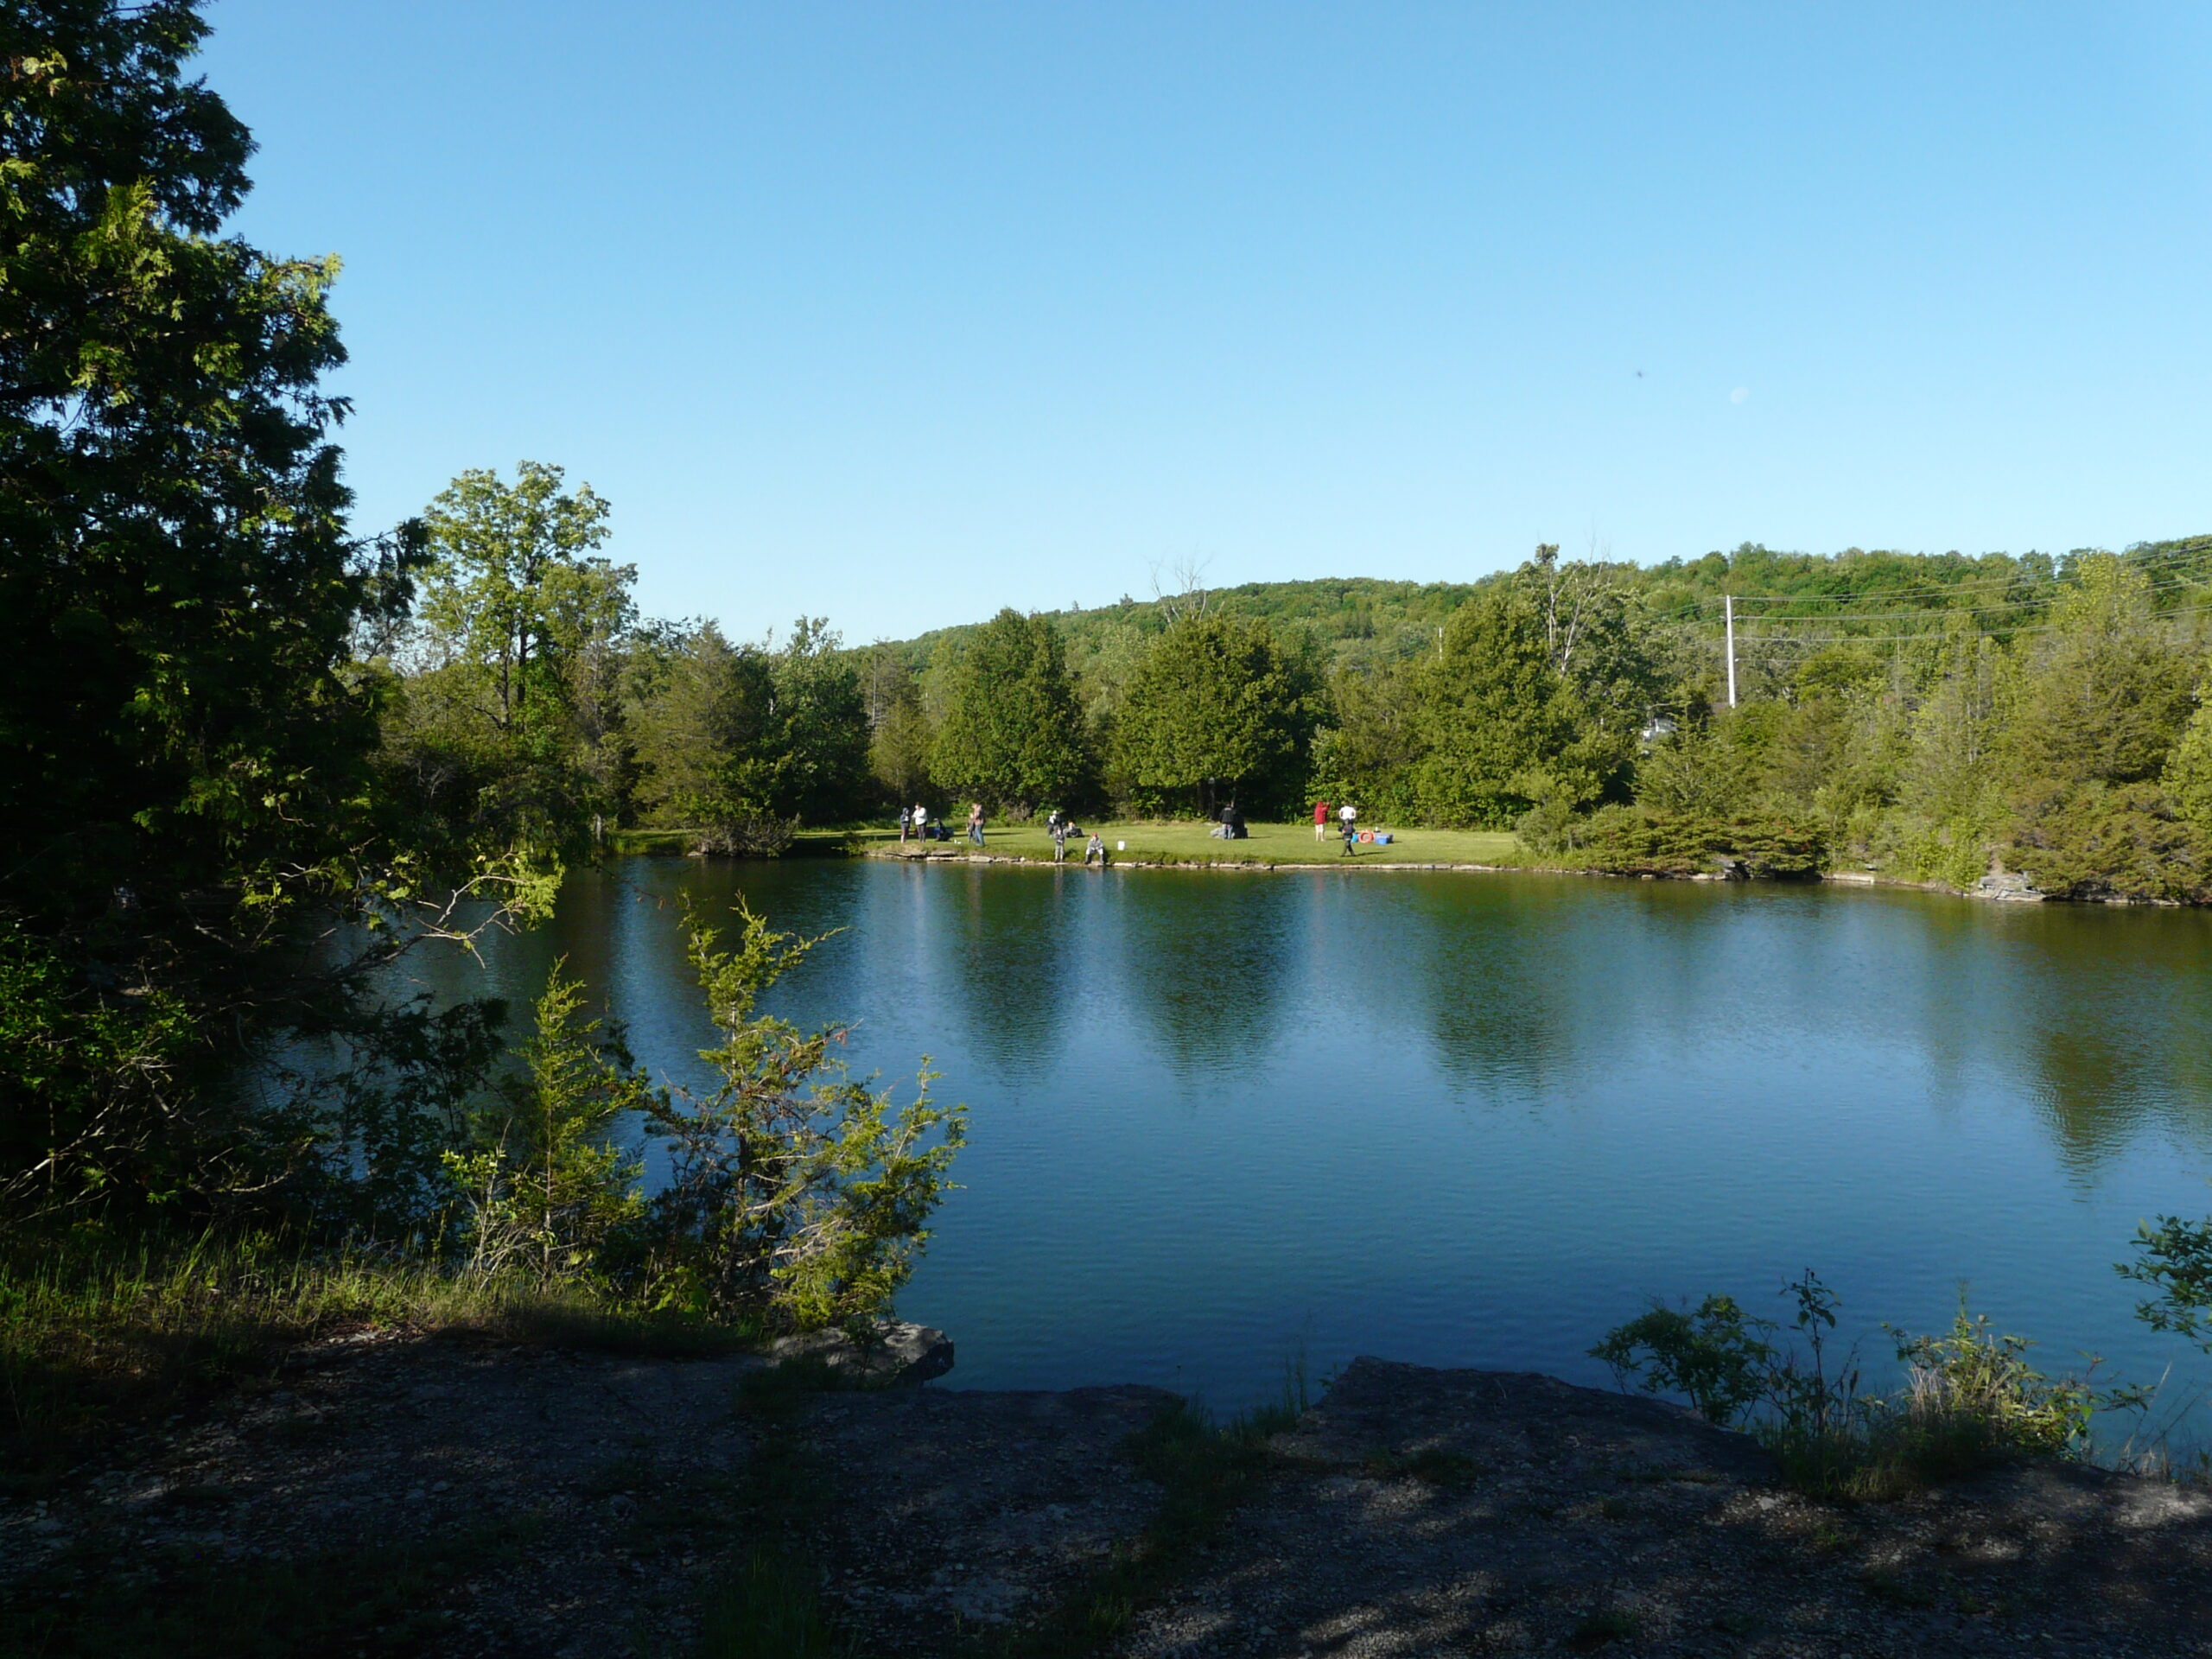 Families and fishing go together at Seymour Conservation Area